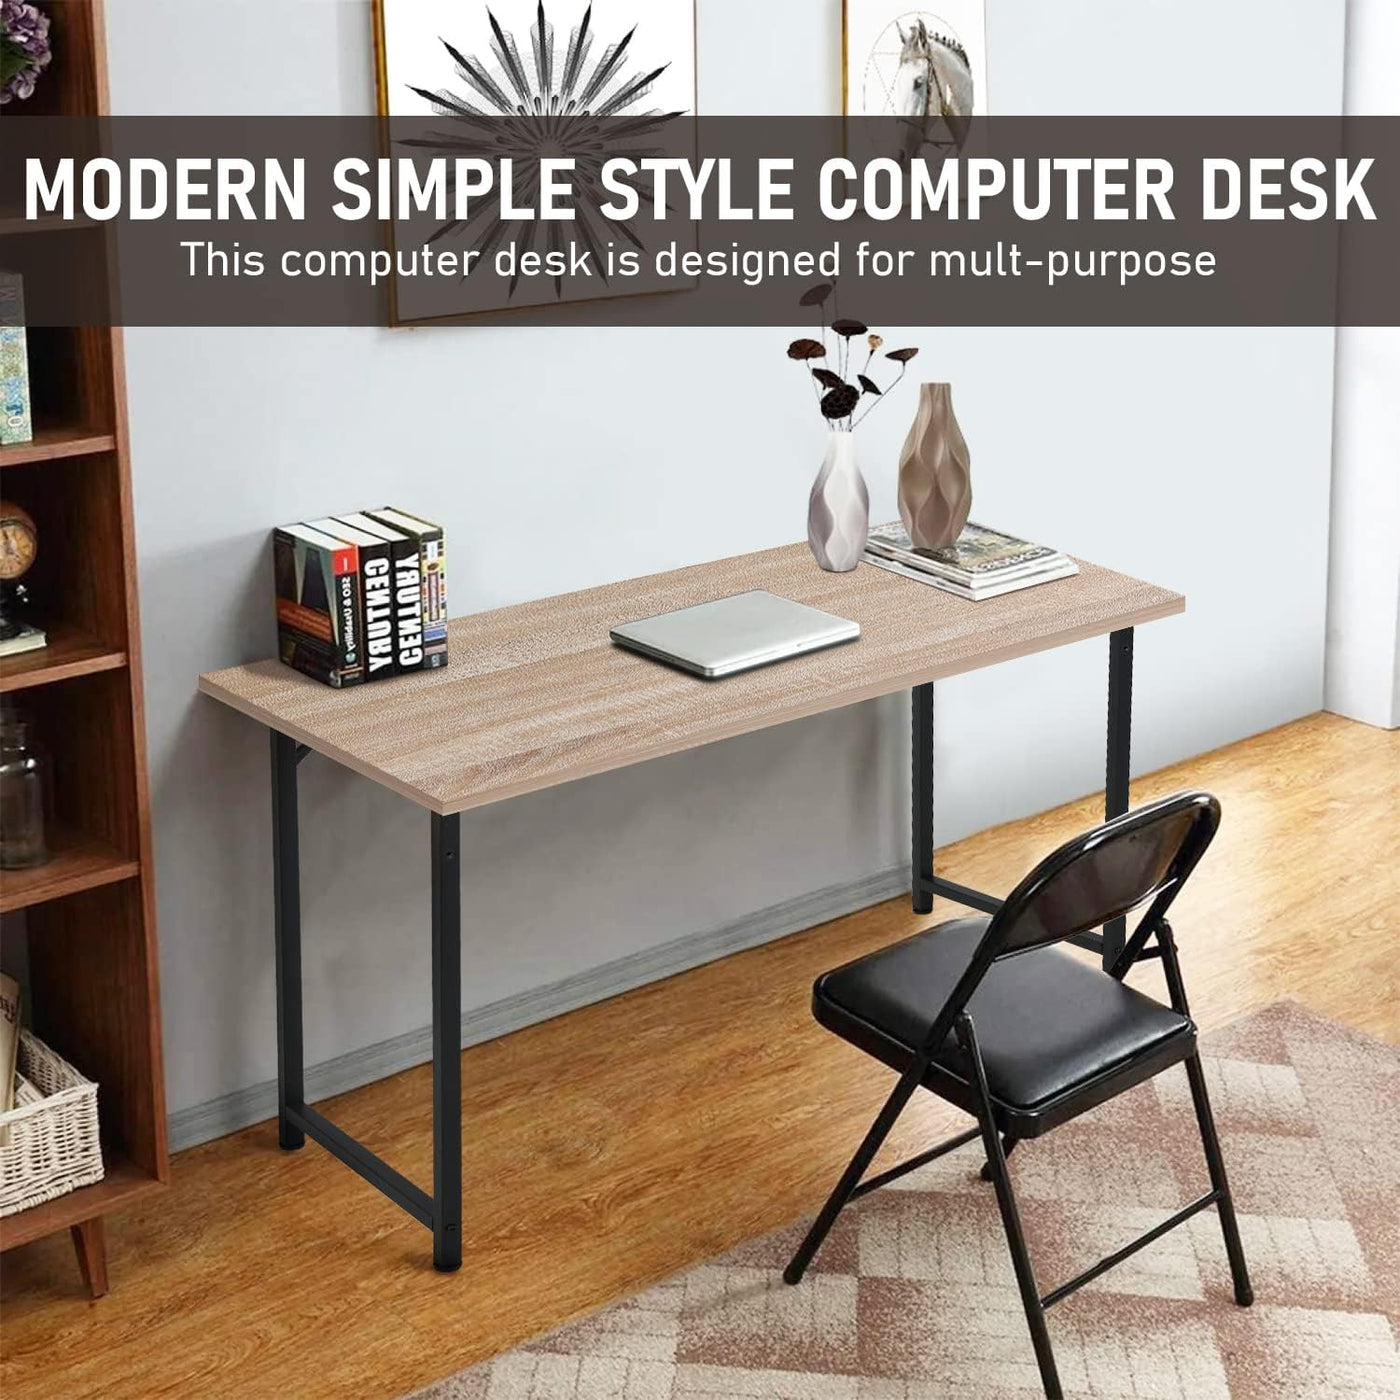 39 inch Computer Desk Home Office Desk Writing Study Table - $30